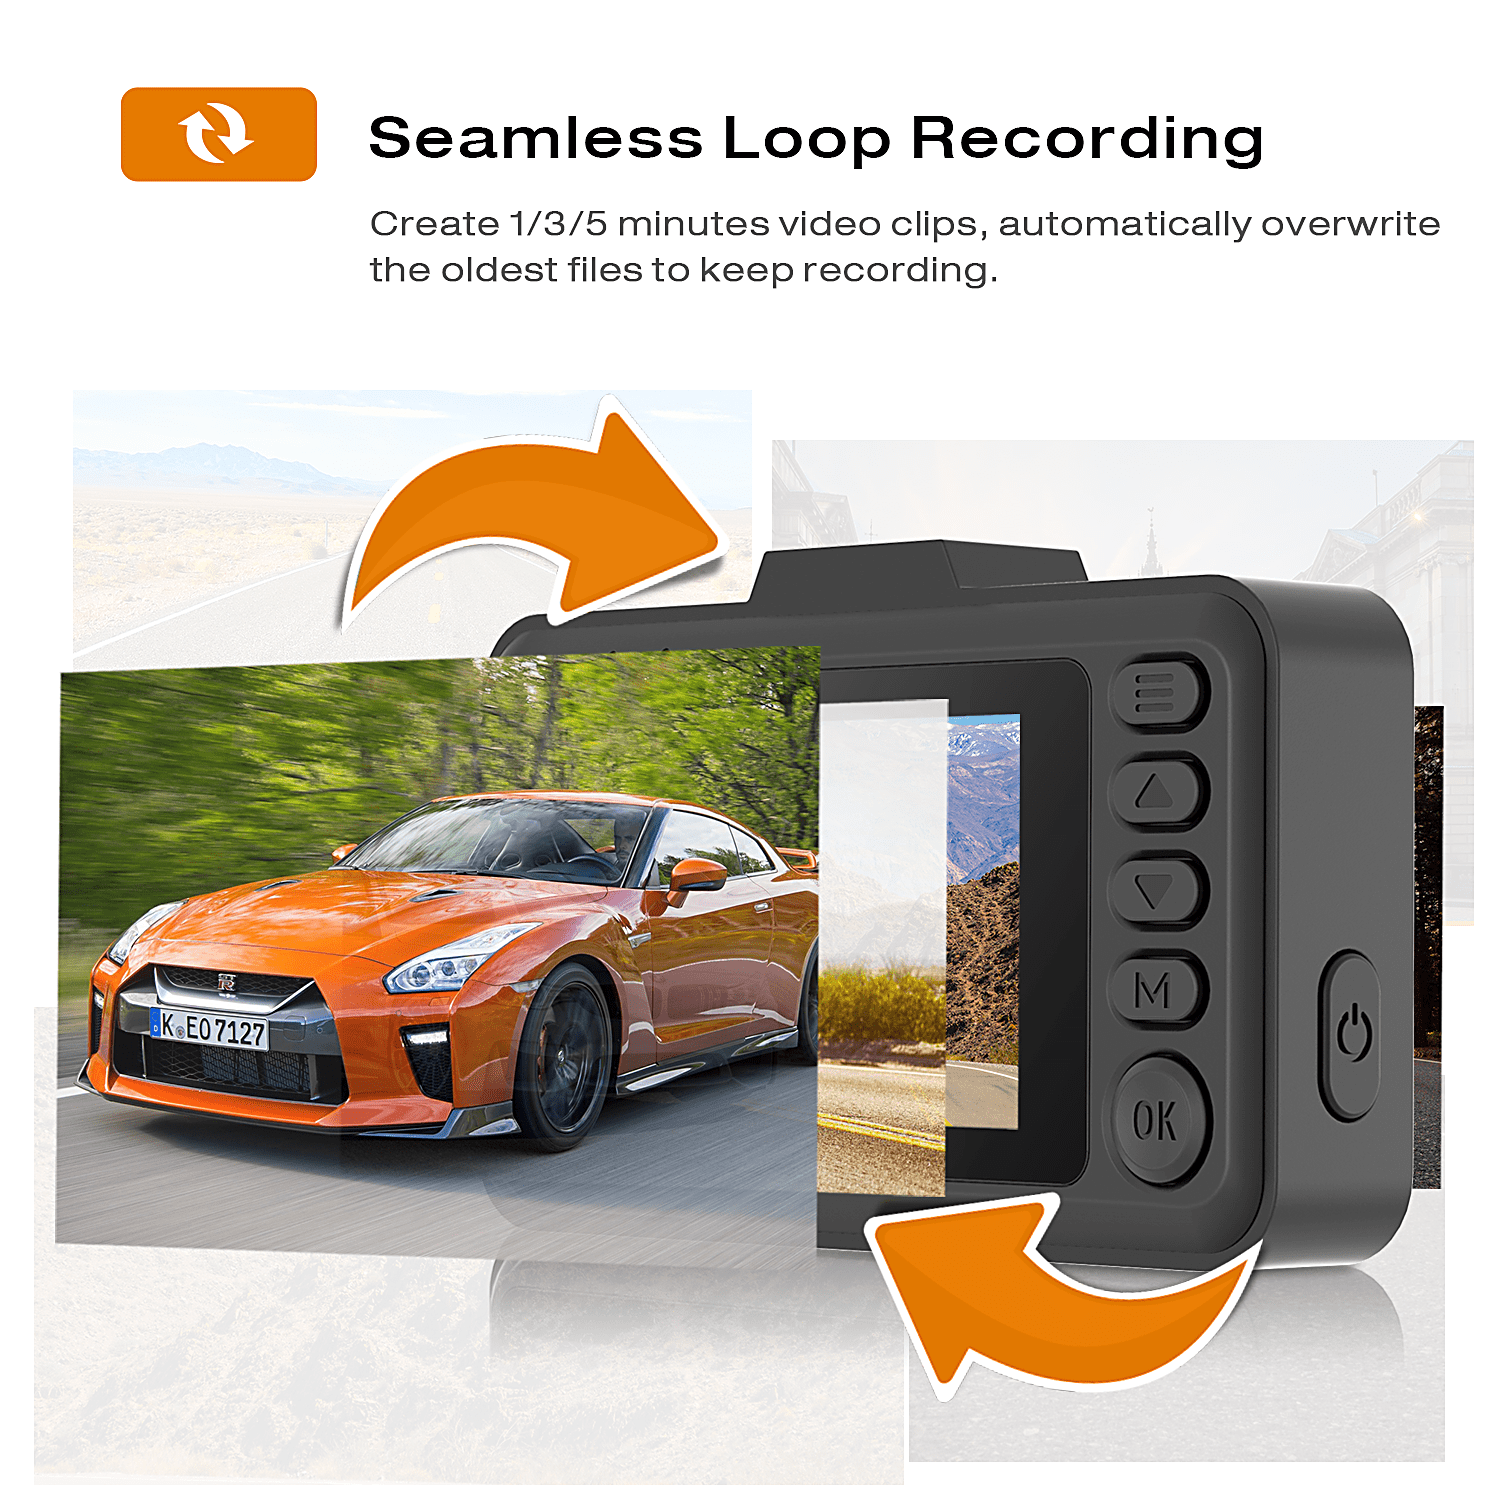 Dash Cam, FHD 1080P Mini Dash Camera for Cars with WiFi, 2.45 IPS Screen,  Night Vision, WDR, Loop Recording, G-Sensor Lock, 170°Wide Angle and